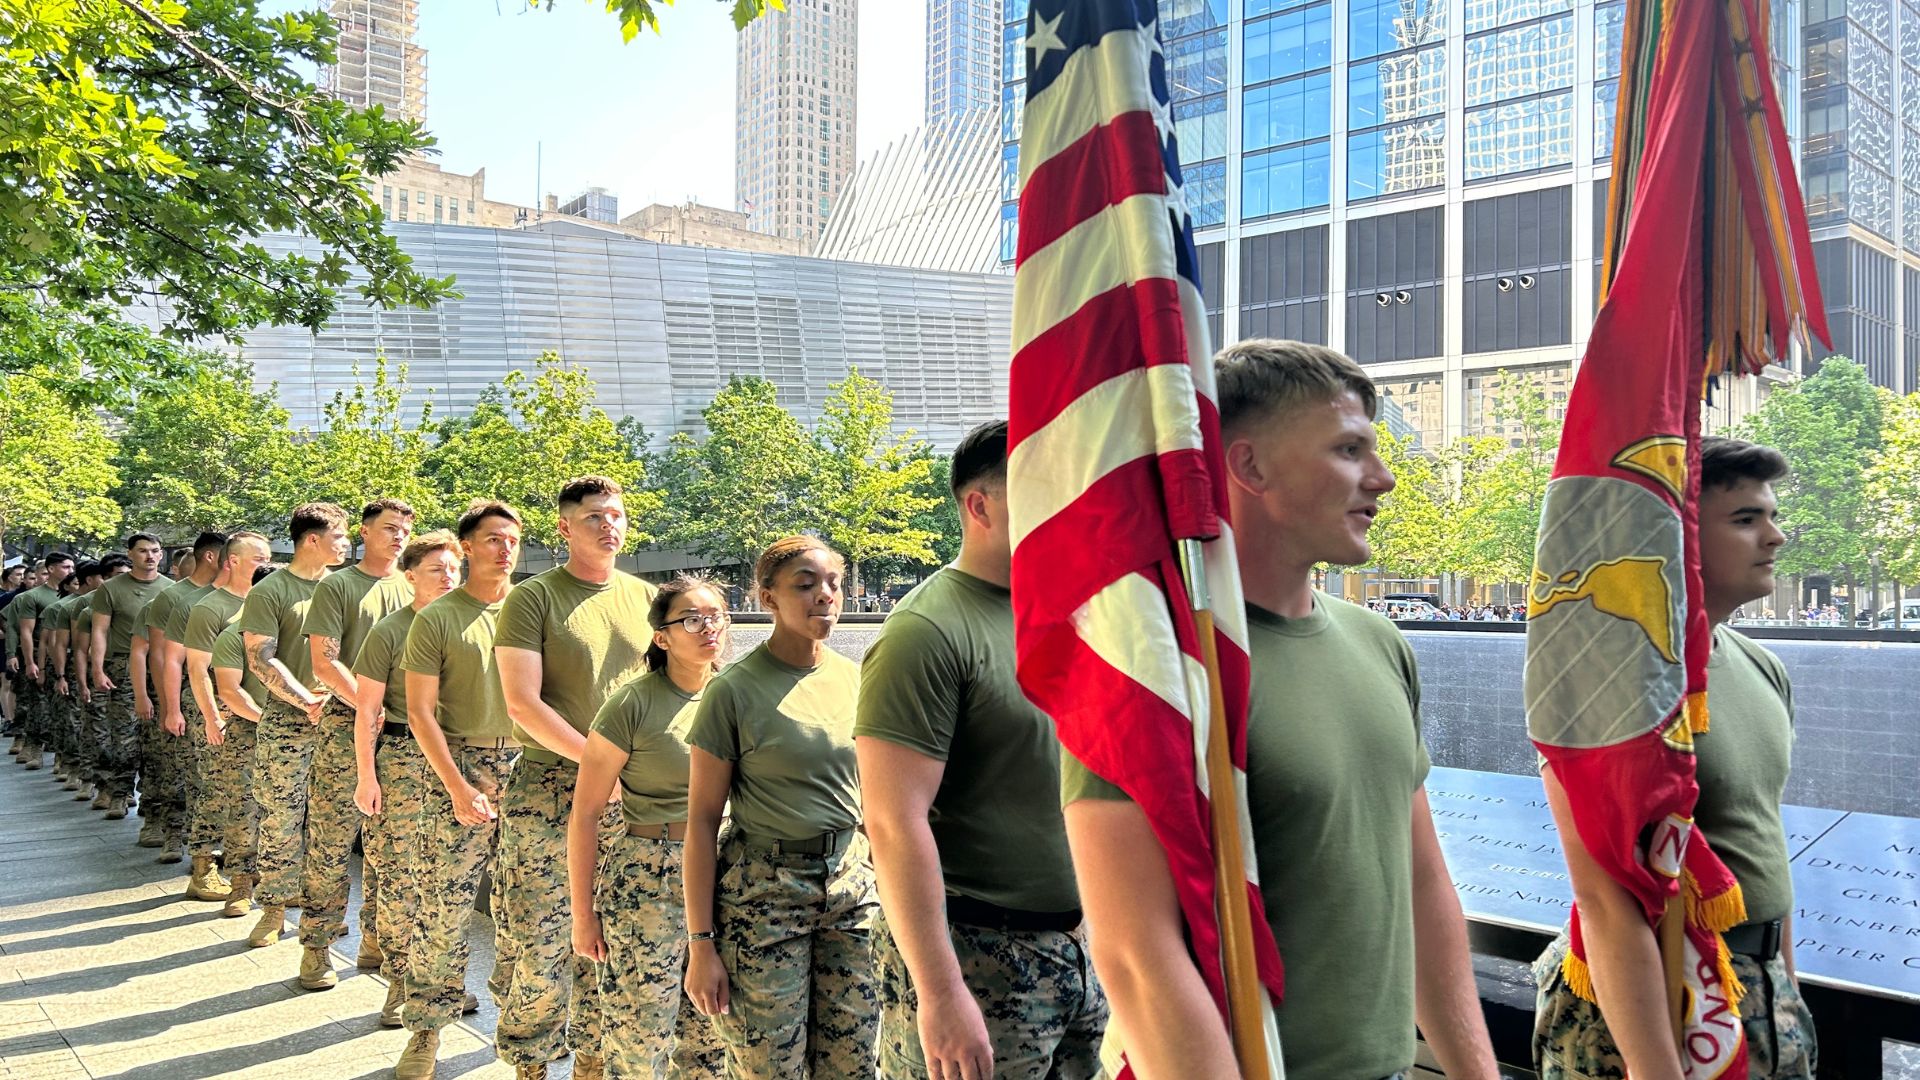 Soldiers in camouflage line up along the Memorial pools of the Memorial, with two at the front carrying flags.